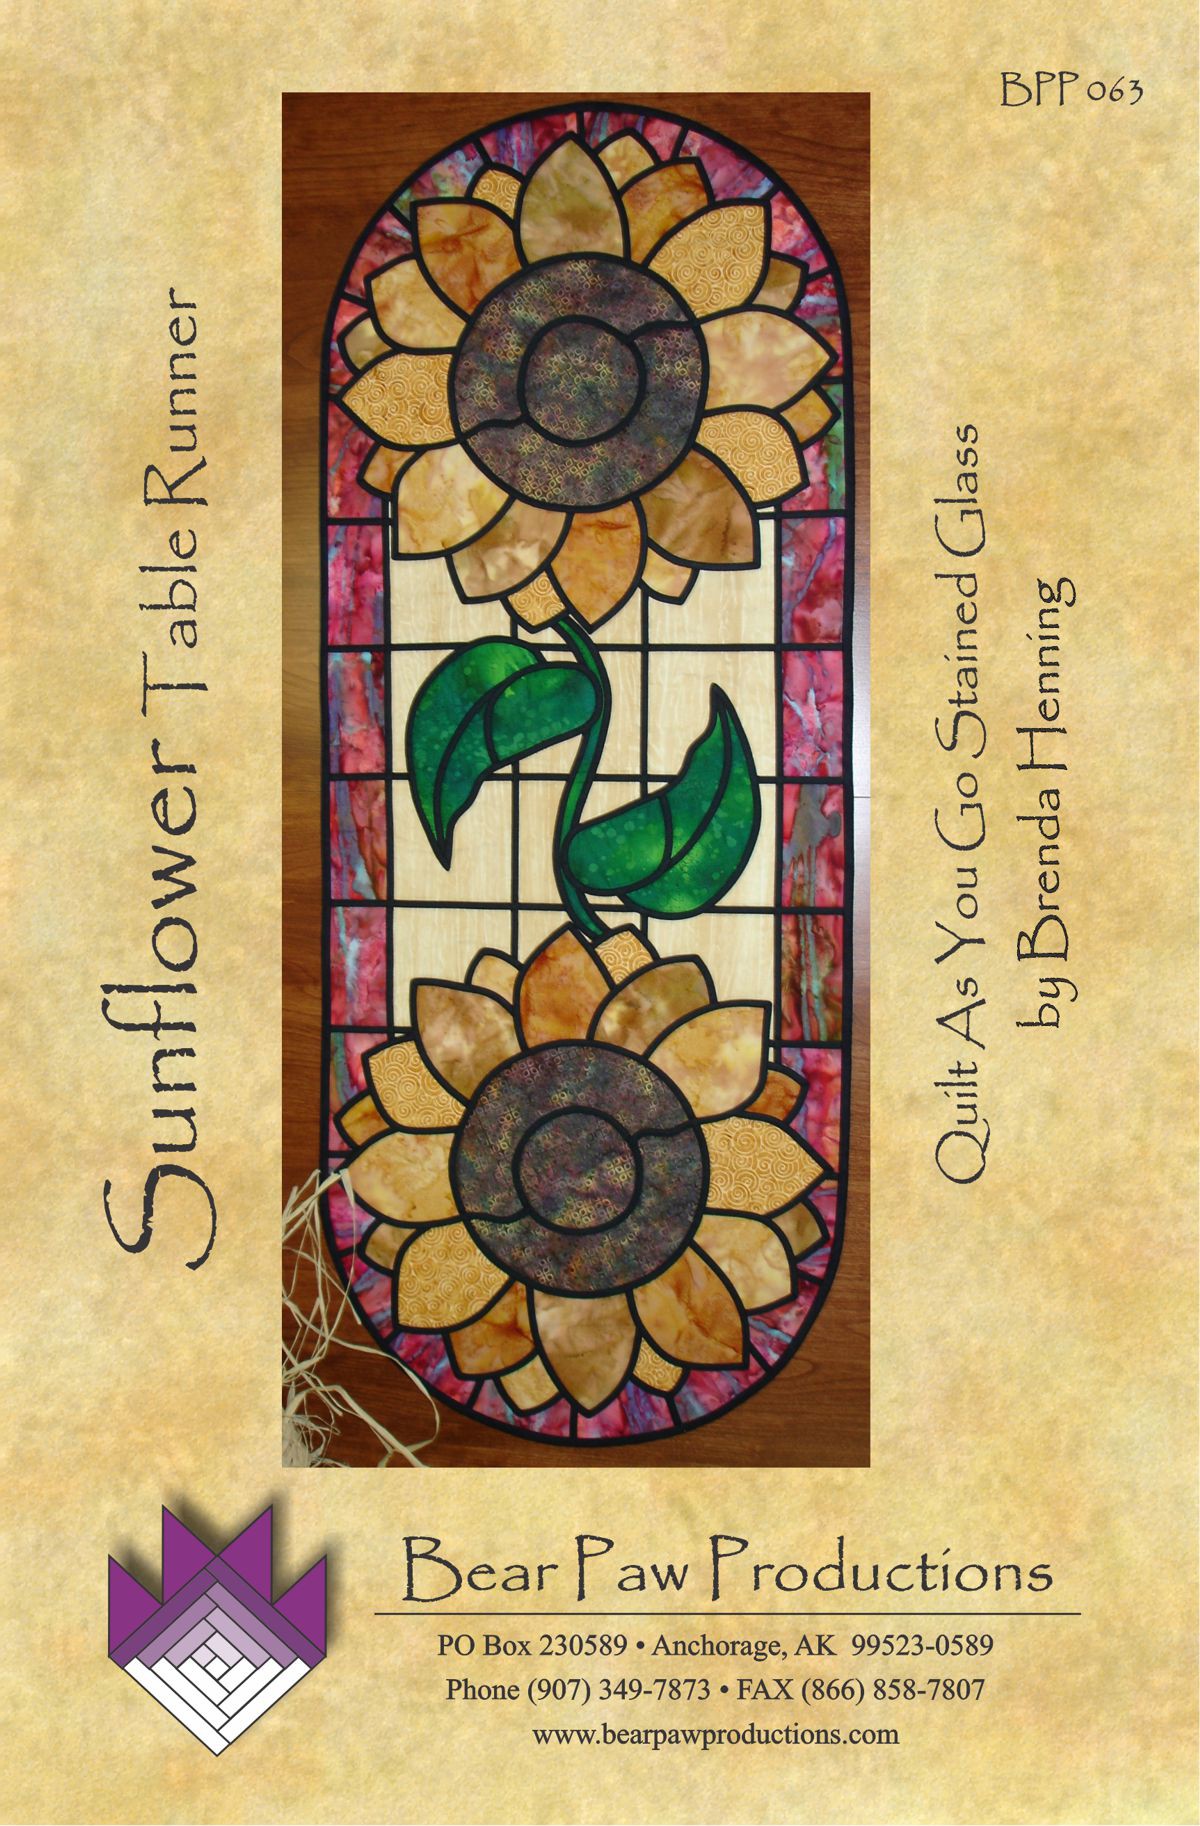 Sunflower Stained Glass 22x33 Quilt Wall Hanging by Bear Paw Productions